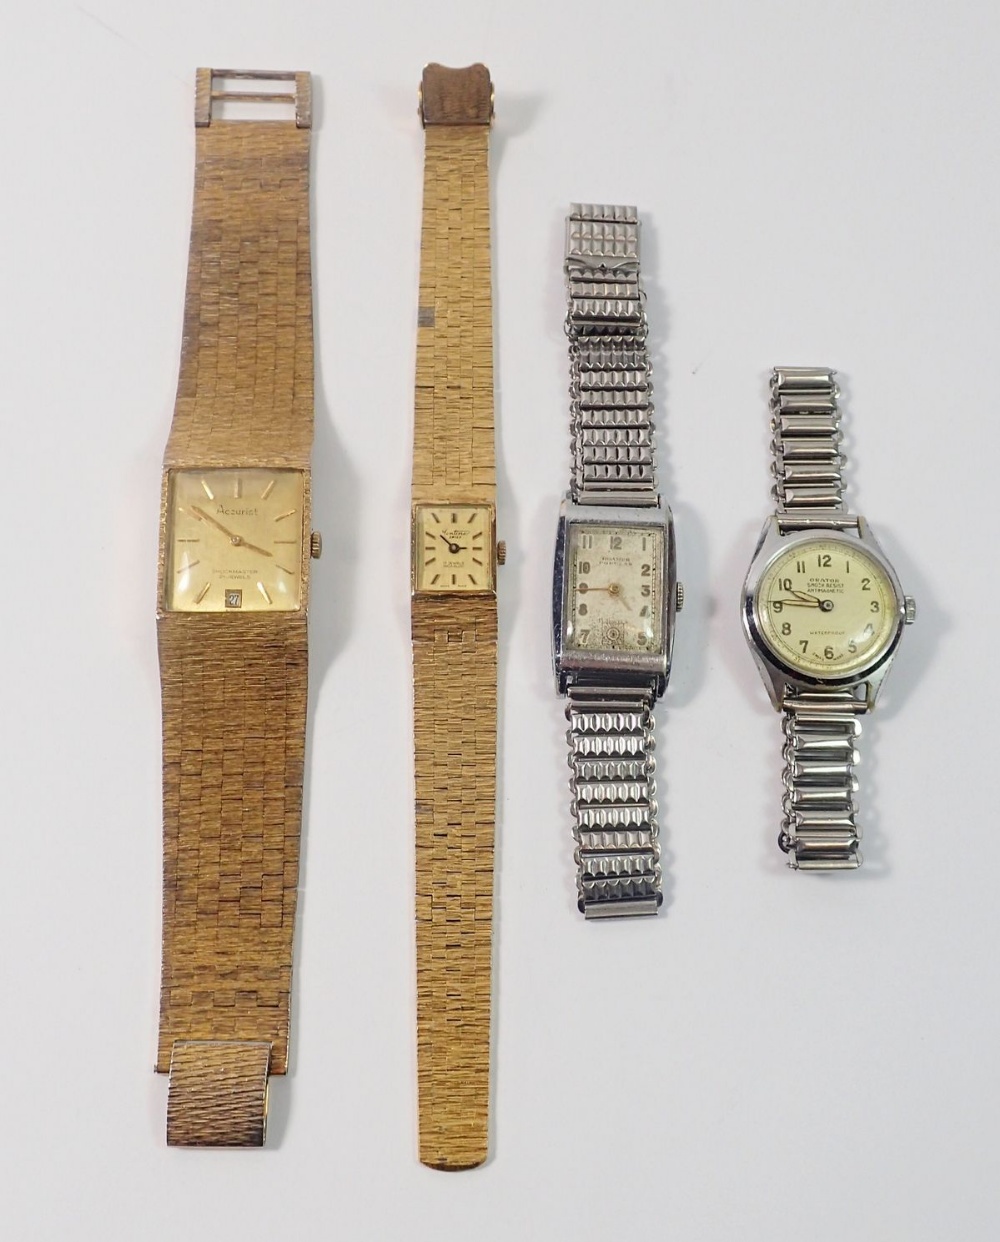 A group of four gentleman's watches including Accurist, Roamer etc.